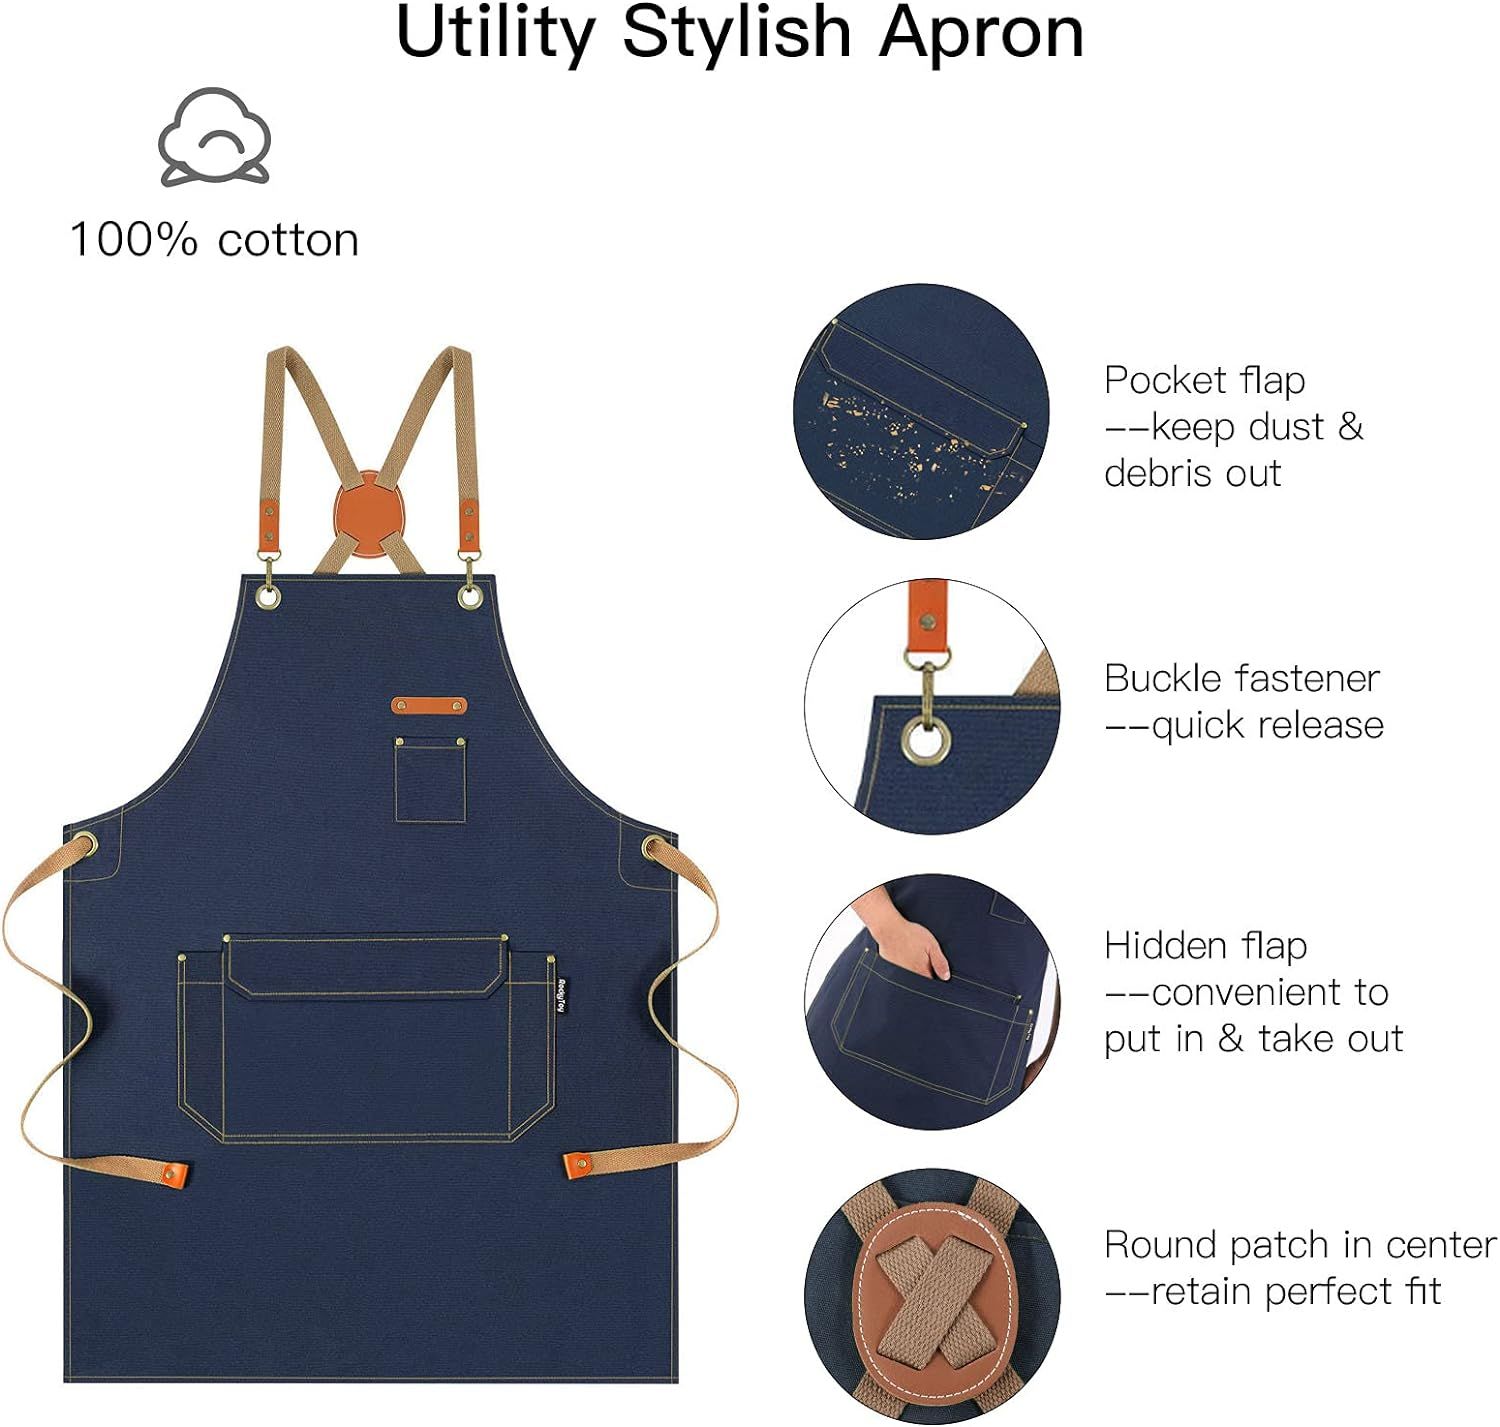 https://media.karousell.com/media/photos/products/2023/10/20/chef_apron_for_men_women_with__1697803996_23050393_progressive